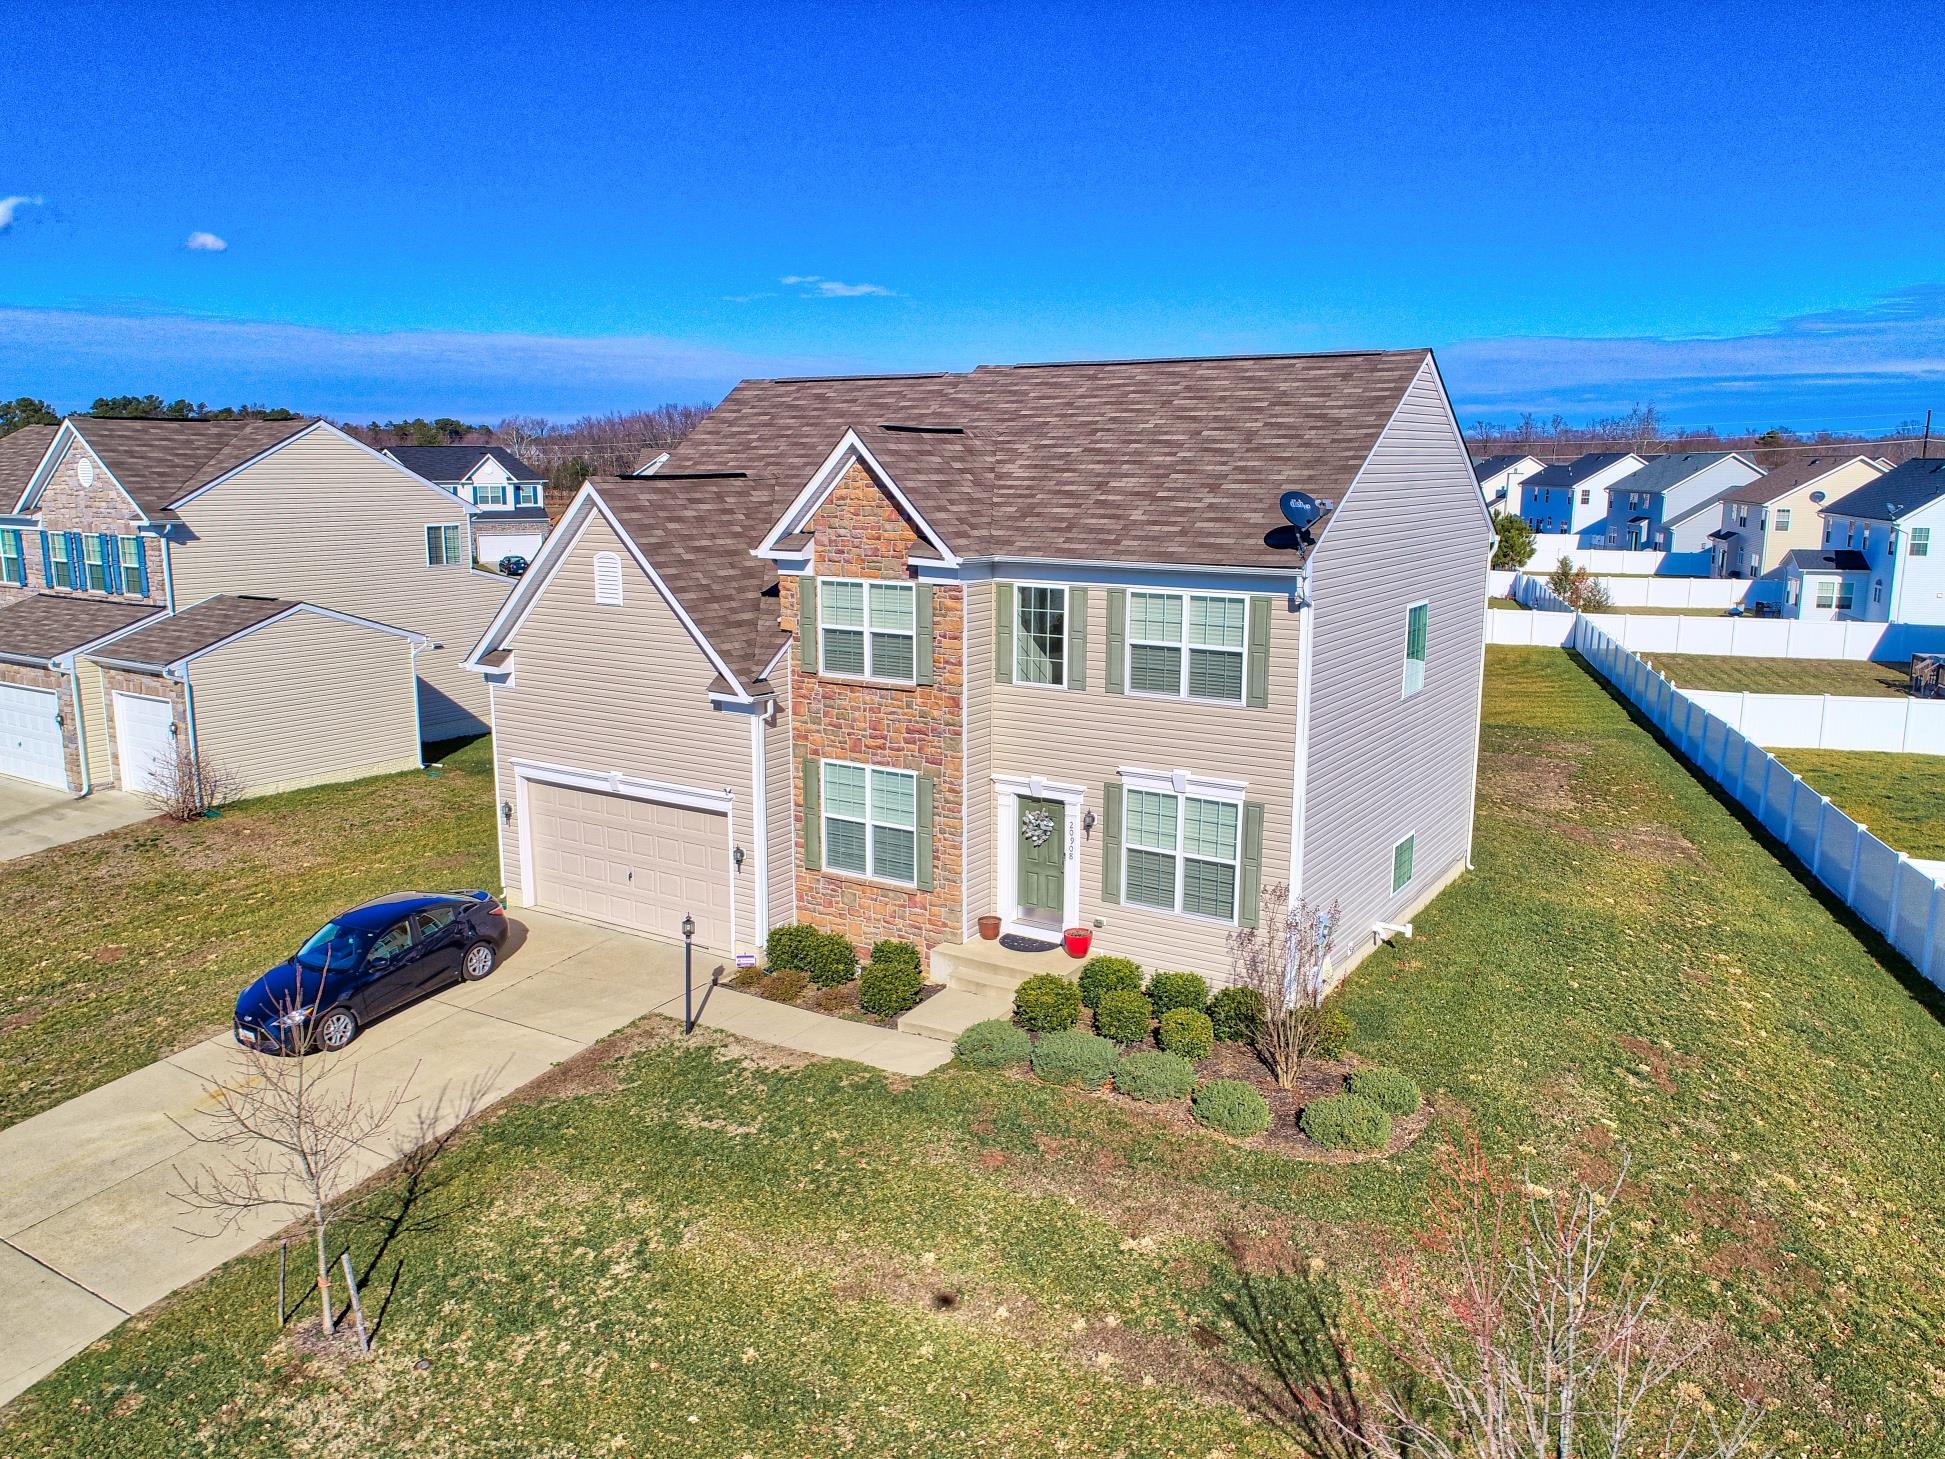 Lexington Park, St Mary's County - 20908 Rowan Knight is a Beautiful Single Family Home in Pembrooke Community off of Willows Road!  Listed by Marie Lally, Realtor with O'Brien Realty of Southern Maryland! The Best of Southern MD